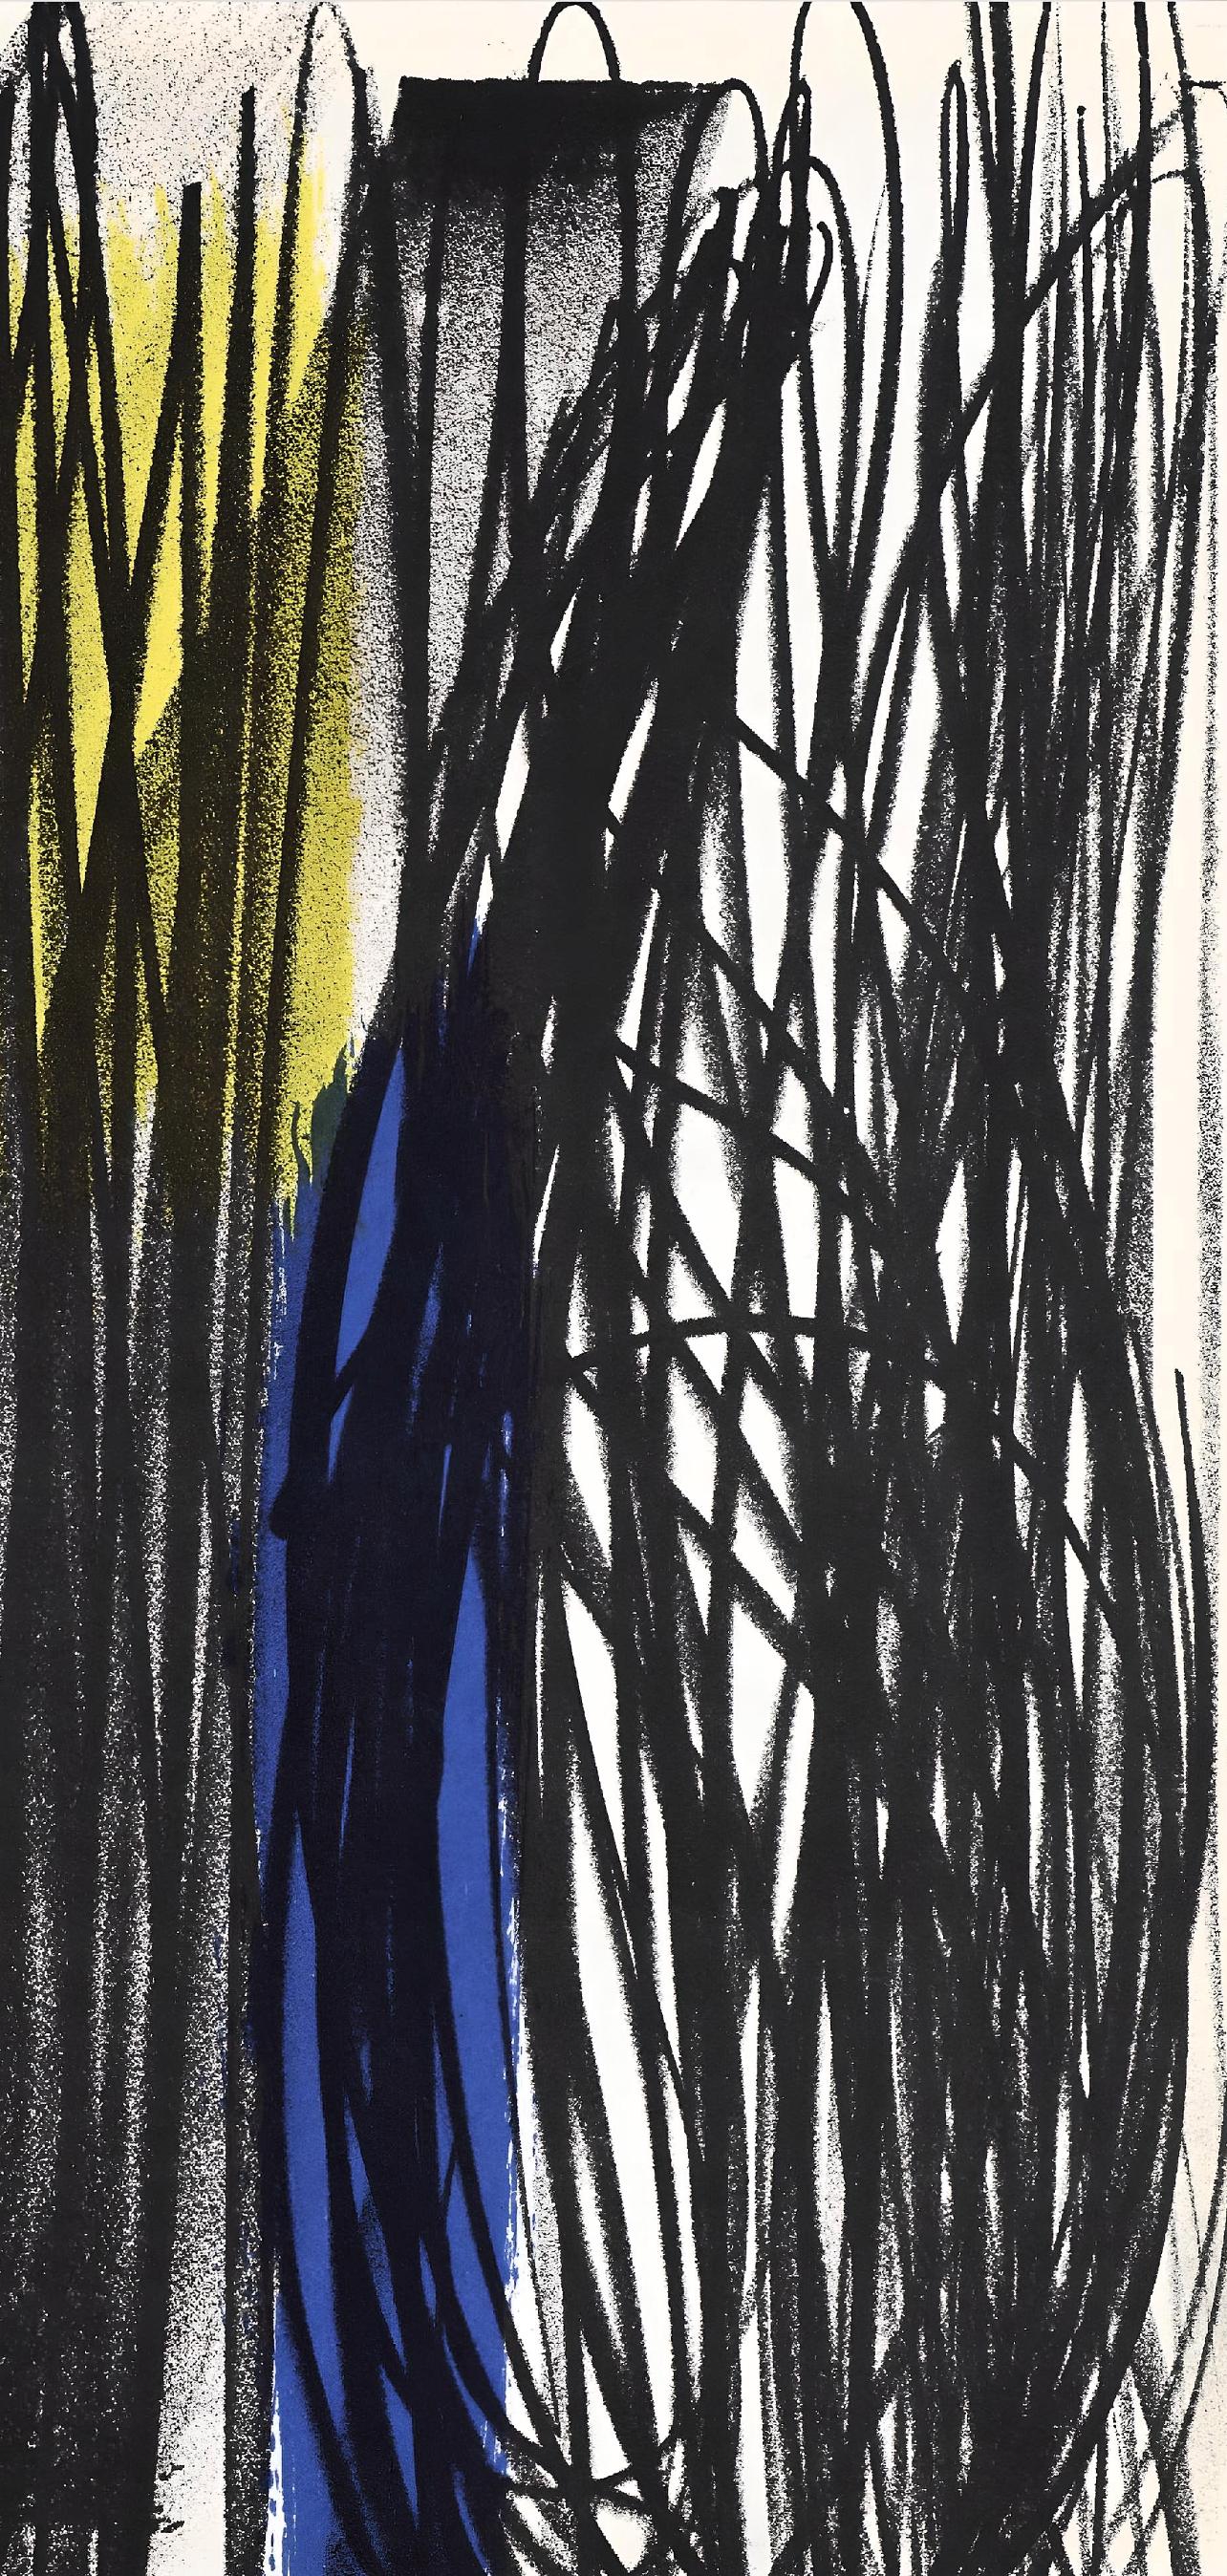 Hartung, Composition, XXe Siècle (after) - Print by Hans Hartung